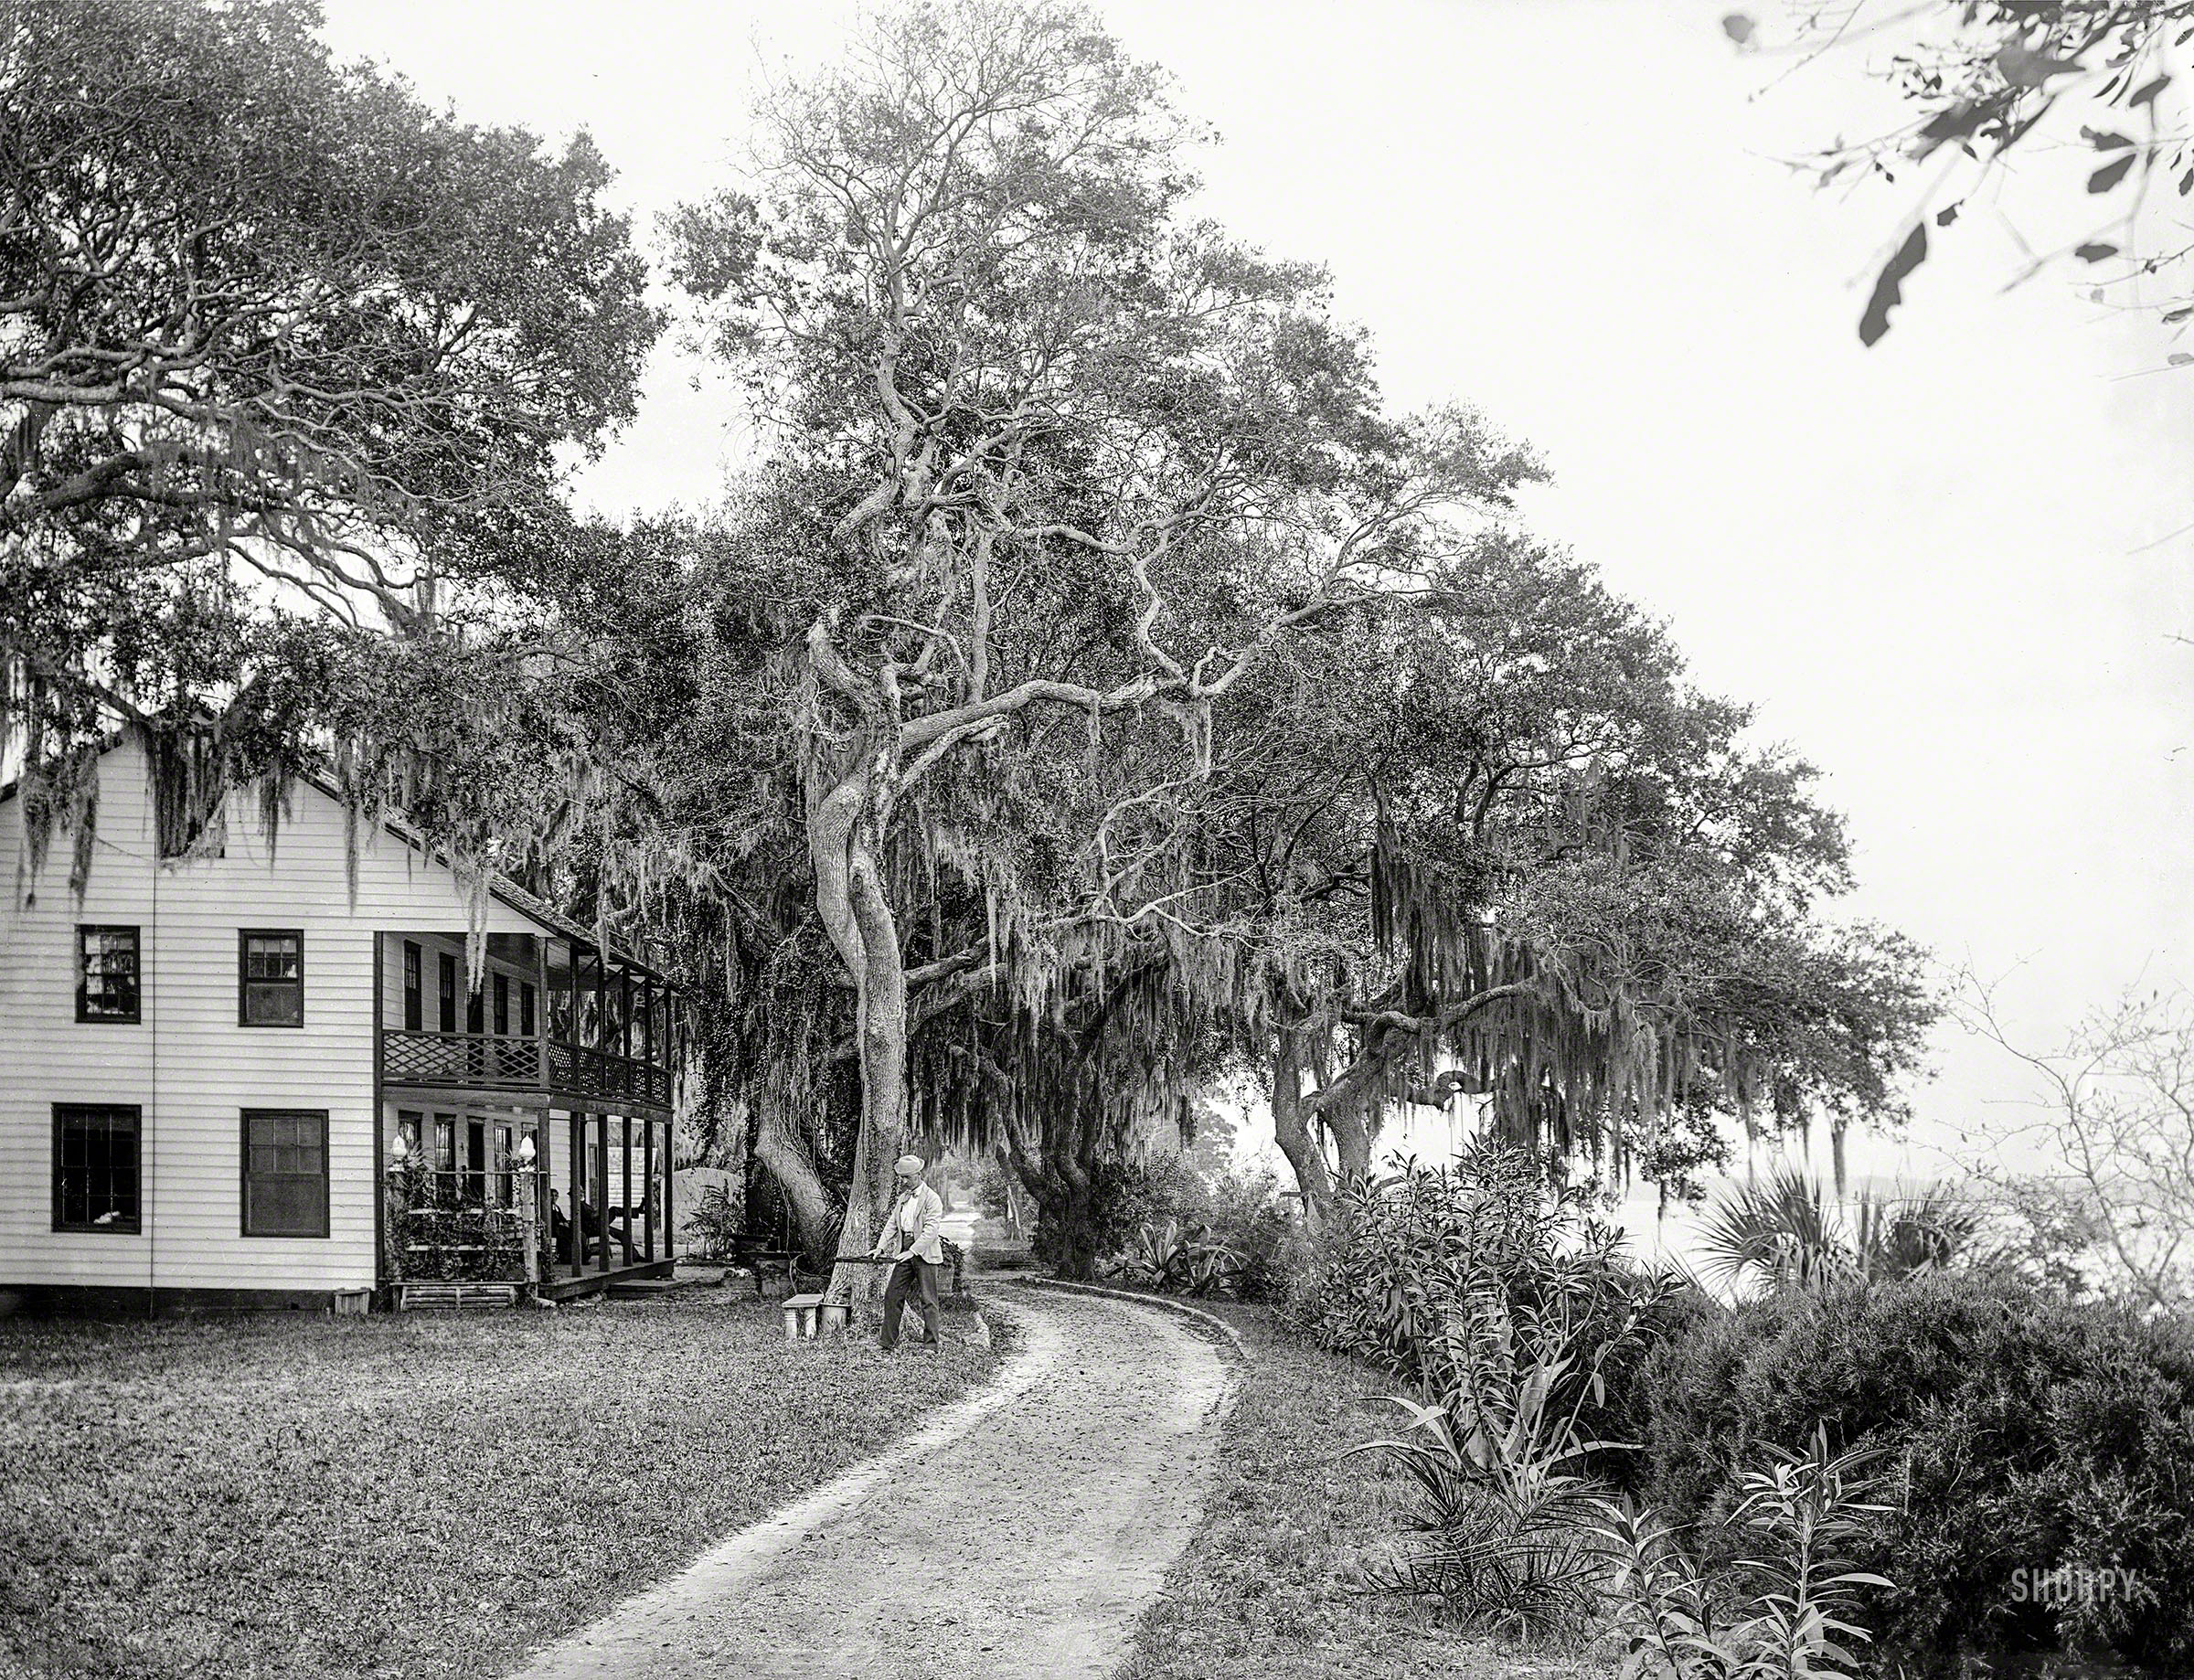 Volusia County, Florida, circa 1890. "Bostrom's on the Halifax near Ormond." A tourist boarding house built by the town's first settlers, the Bostrom brothers. 8x10 inch dry plate glass negative by William Henry Jackson. View full size.